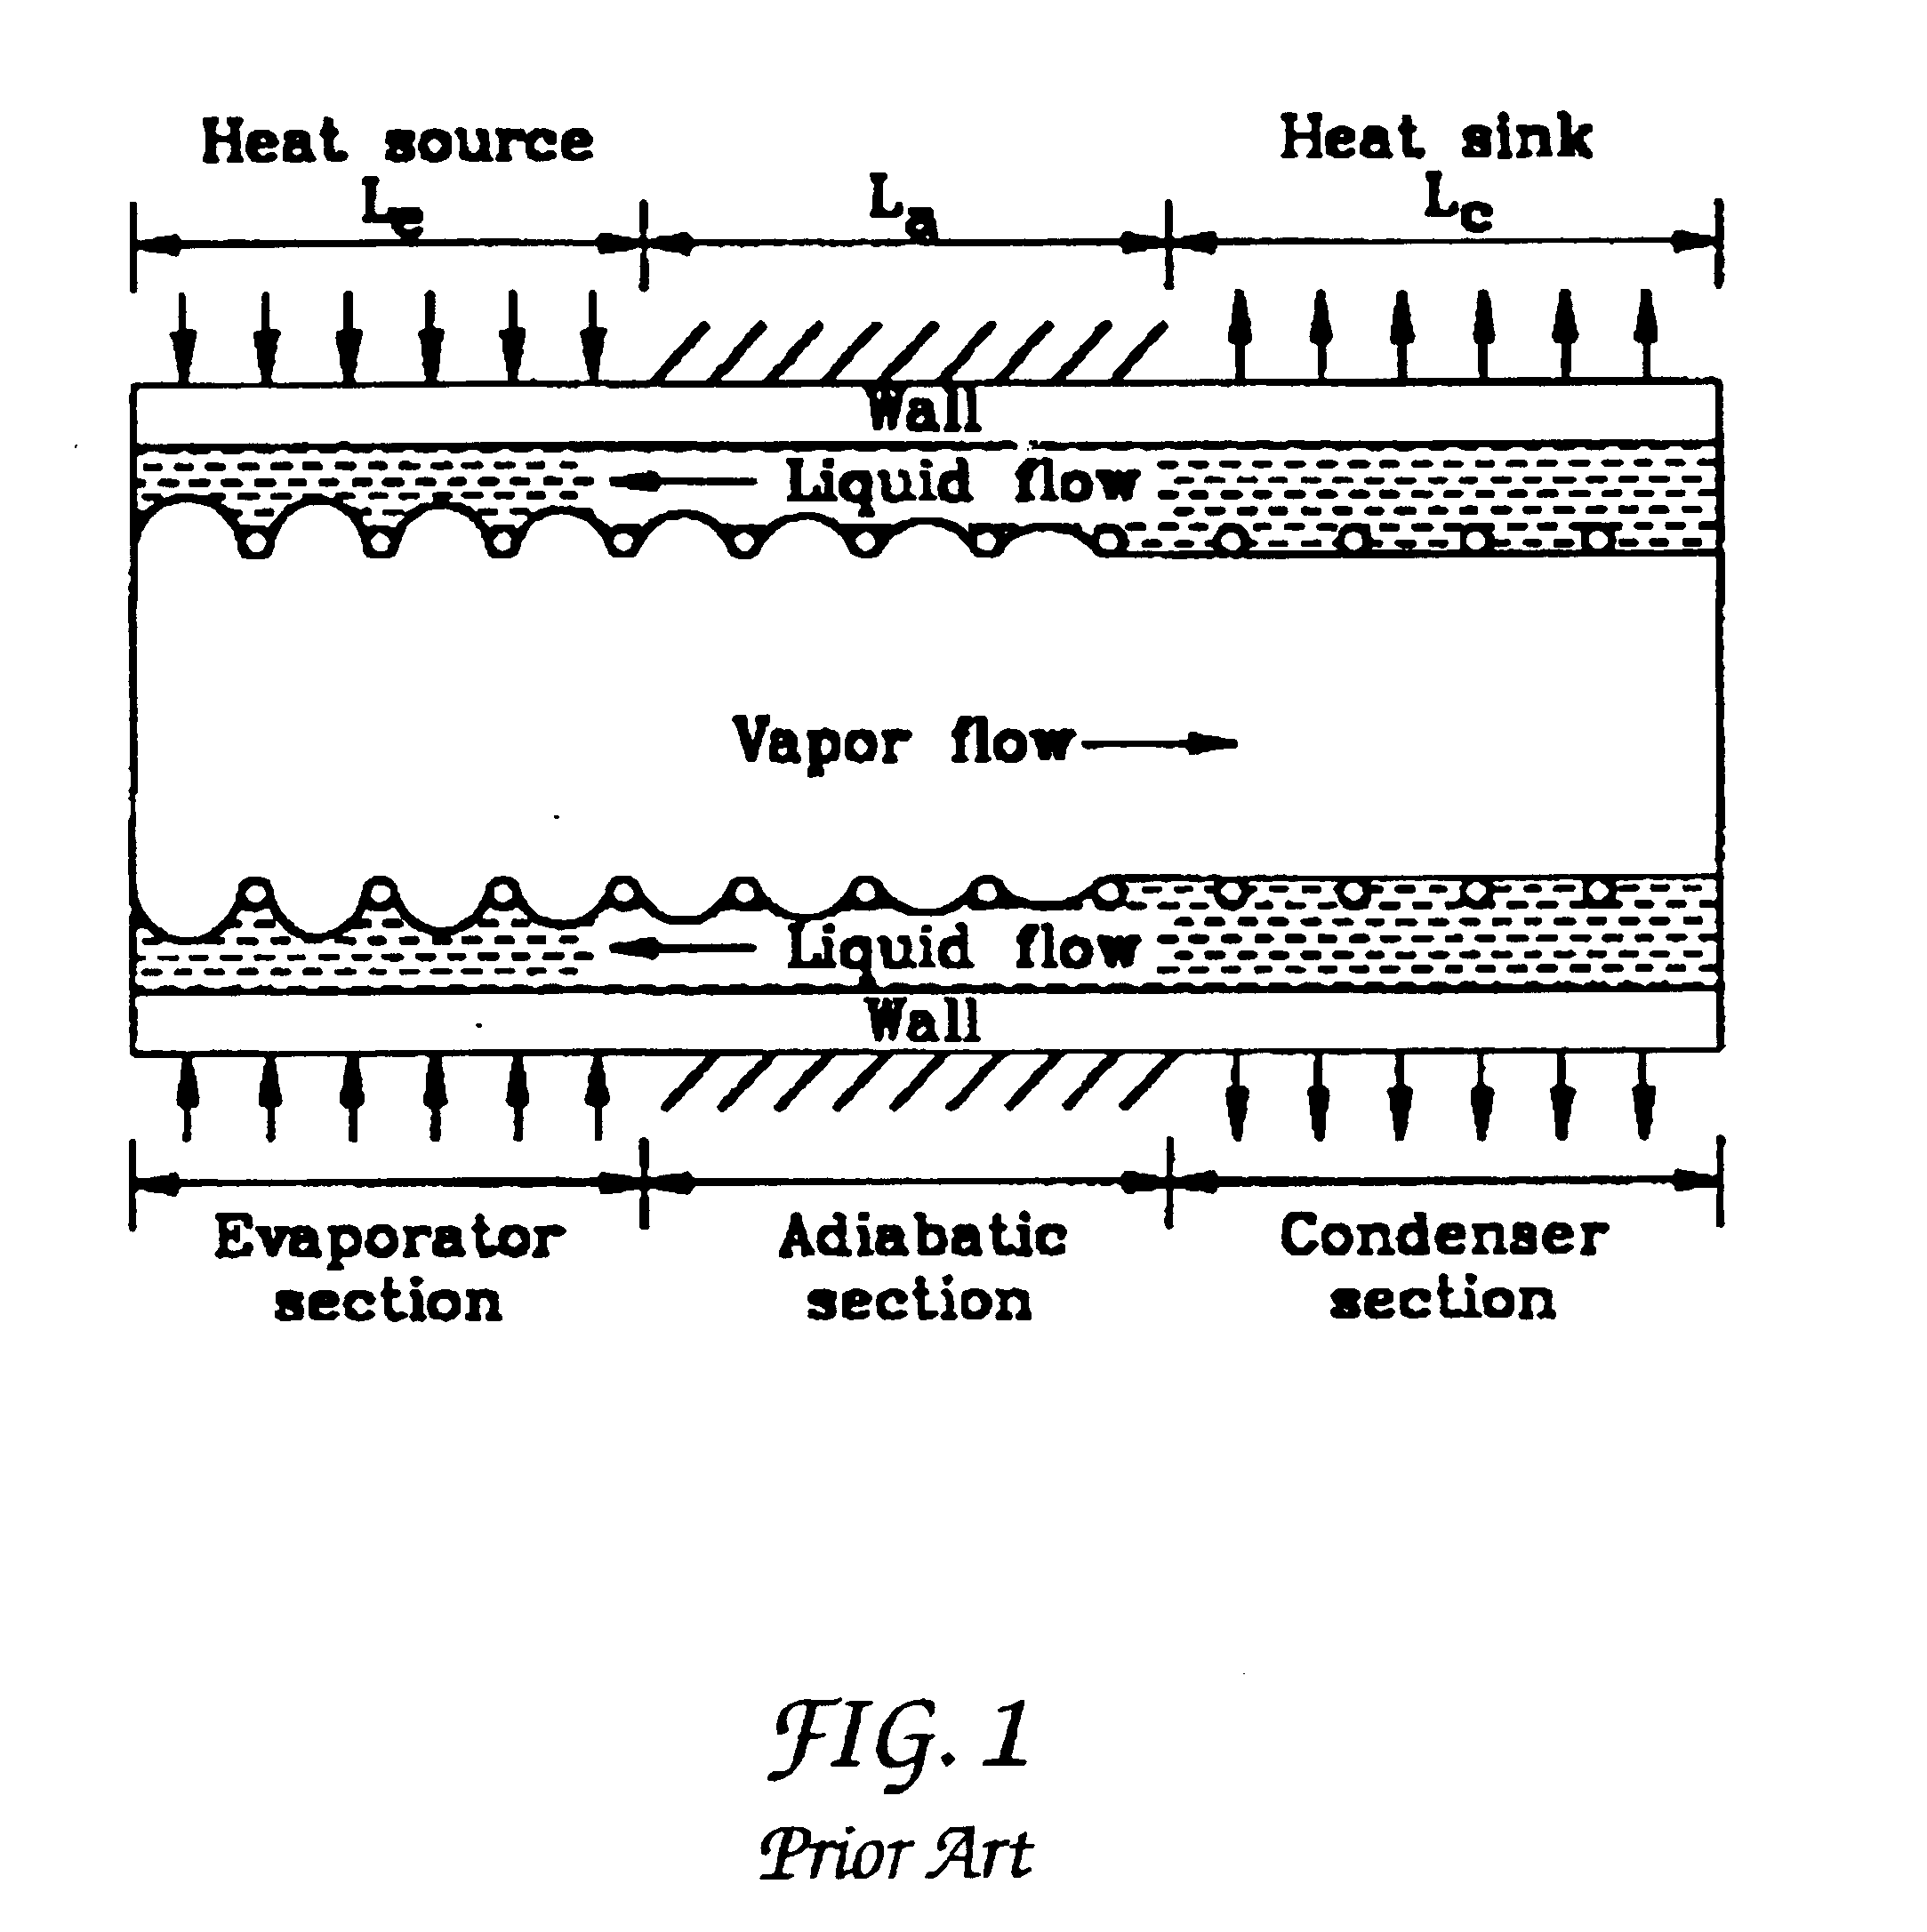 Axially tapered and bilayer microchannels for evaporative coolling devices